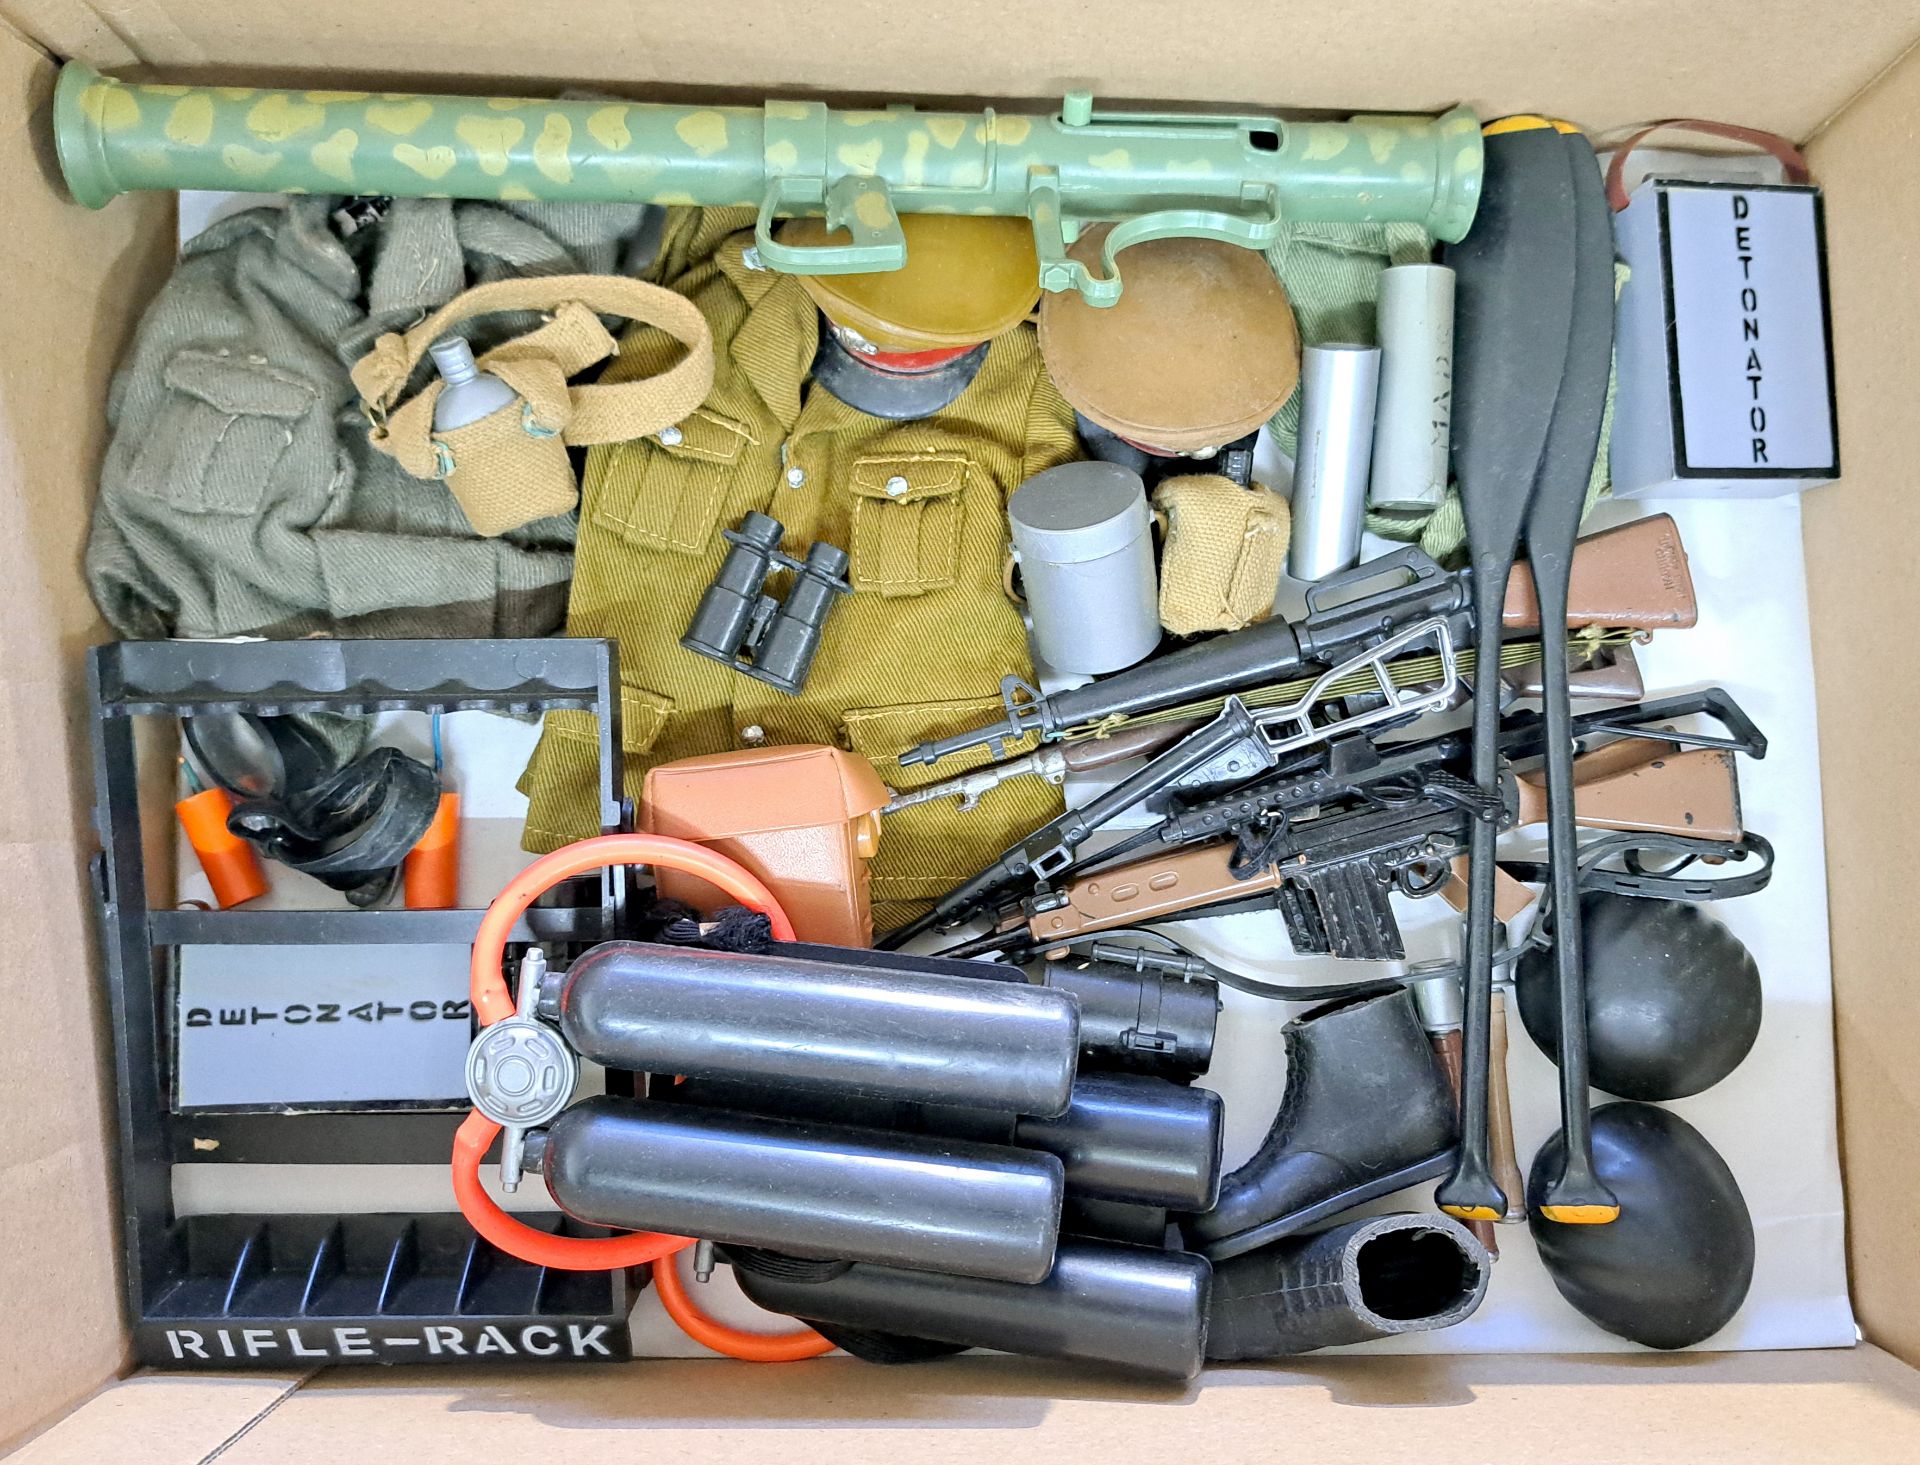 Palitoy Action Man vintage, a group of loose guns/weapons to include Bazooka, Machine guns, Rifle...